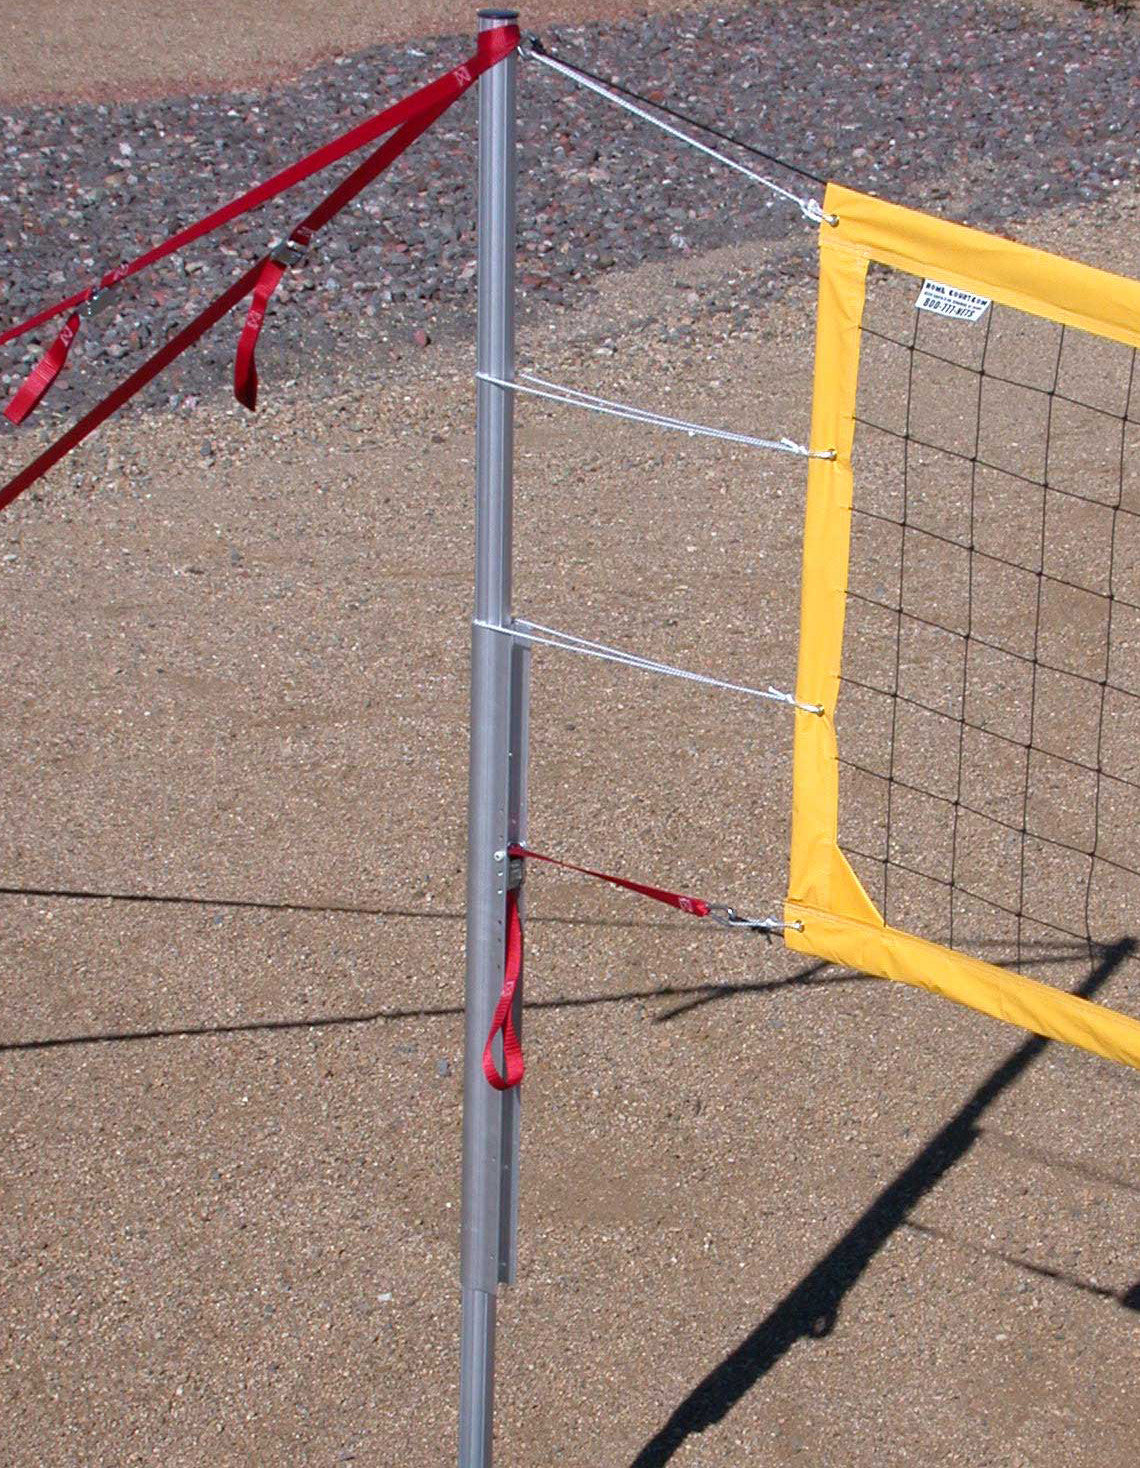 202-CNRY17-Power Net Portable Volleyball Set, poles, yellow net, guy lines, web boundary, stakes & carrying bag